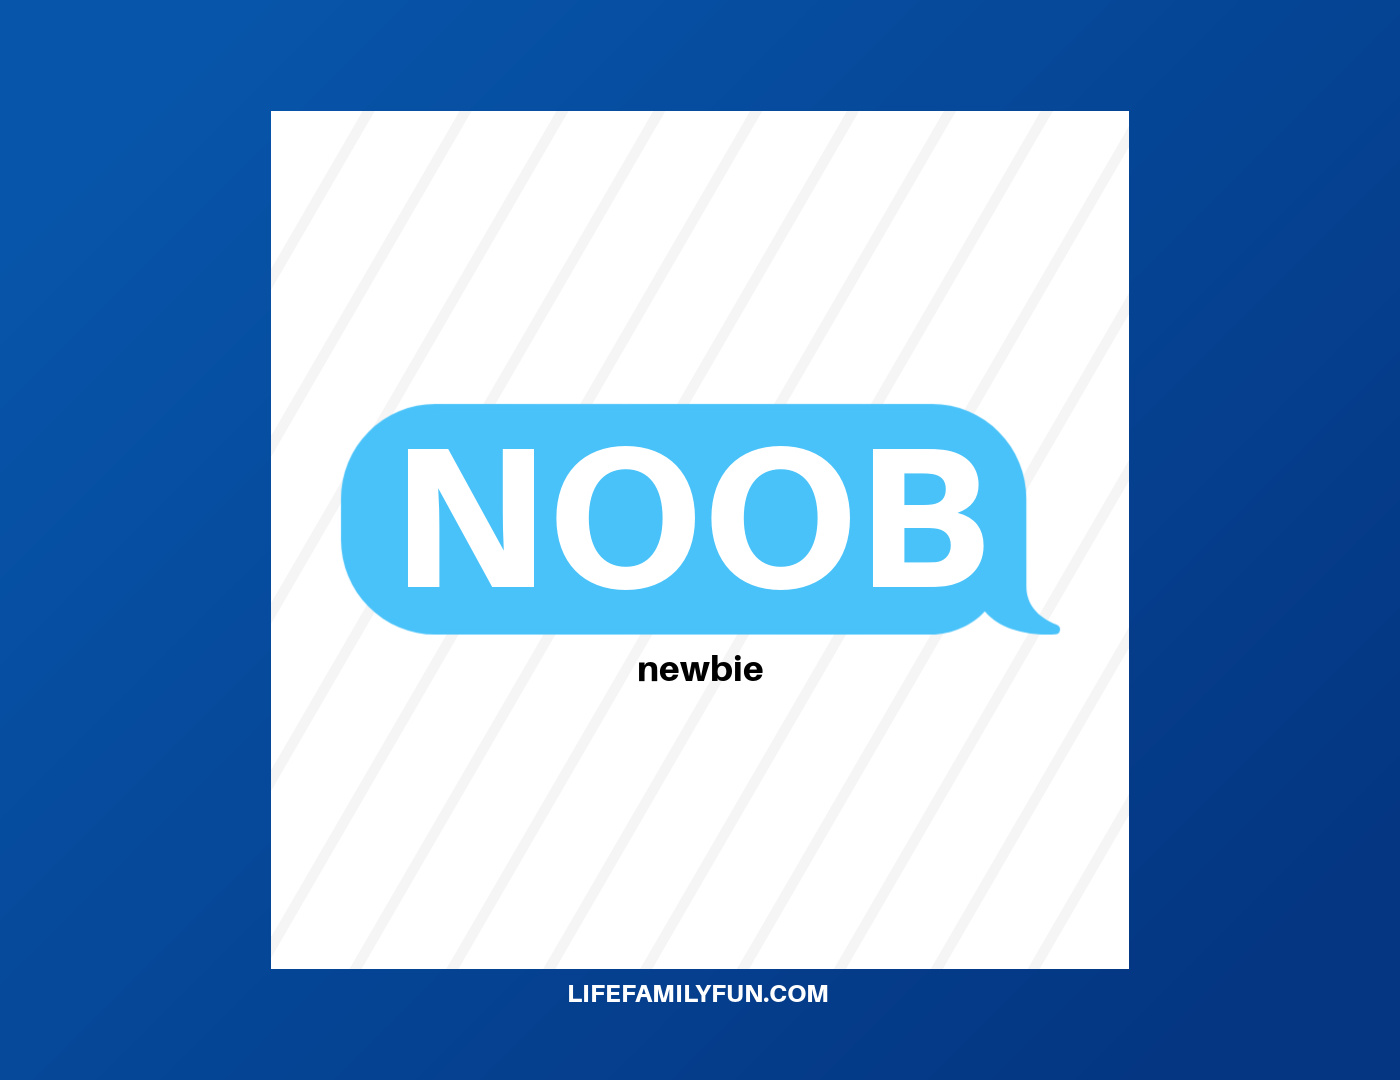 What Does Noob Mean?